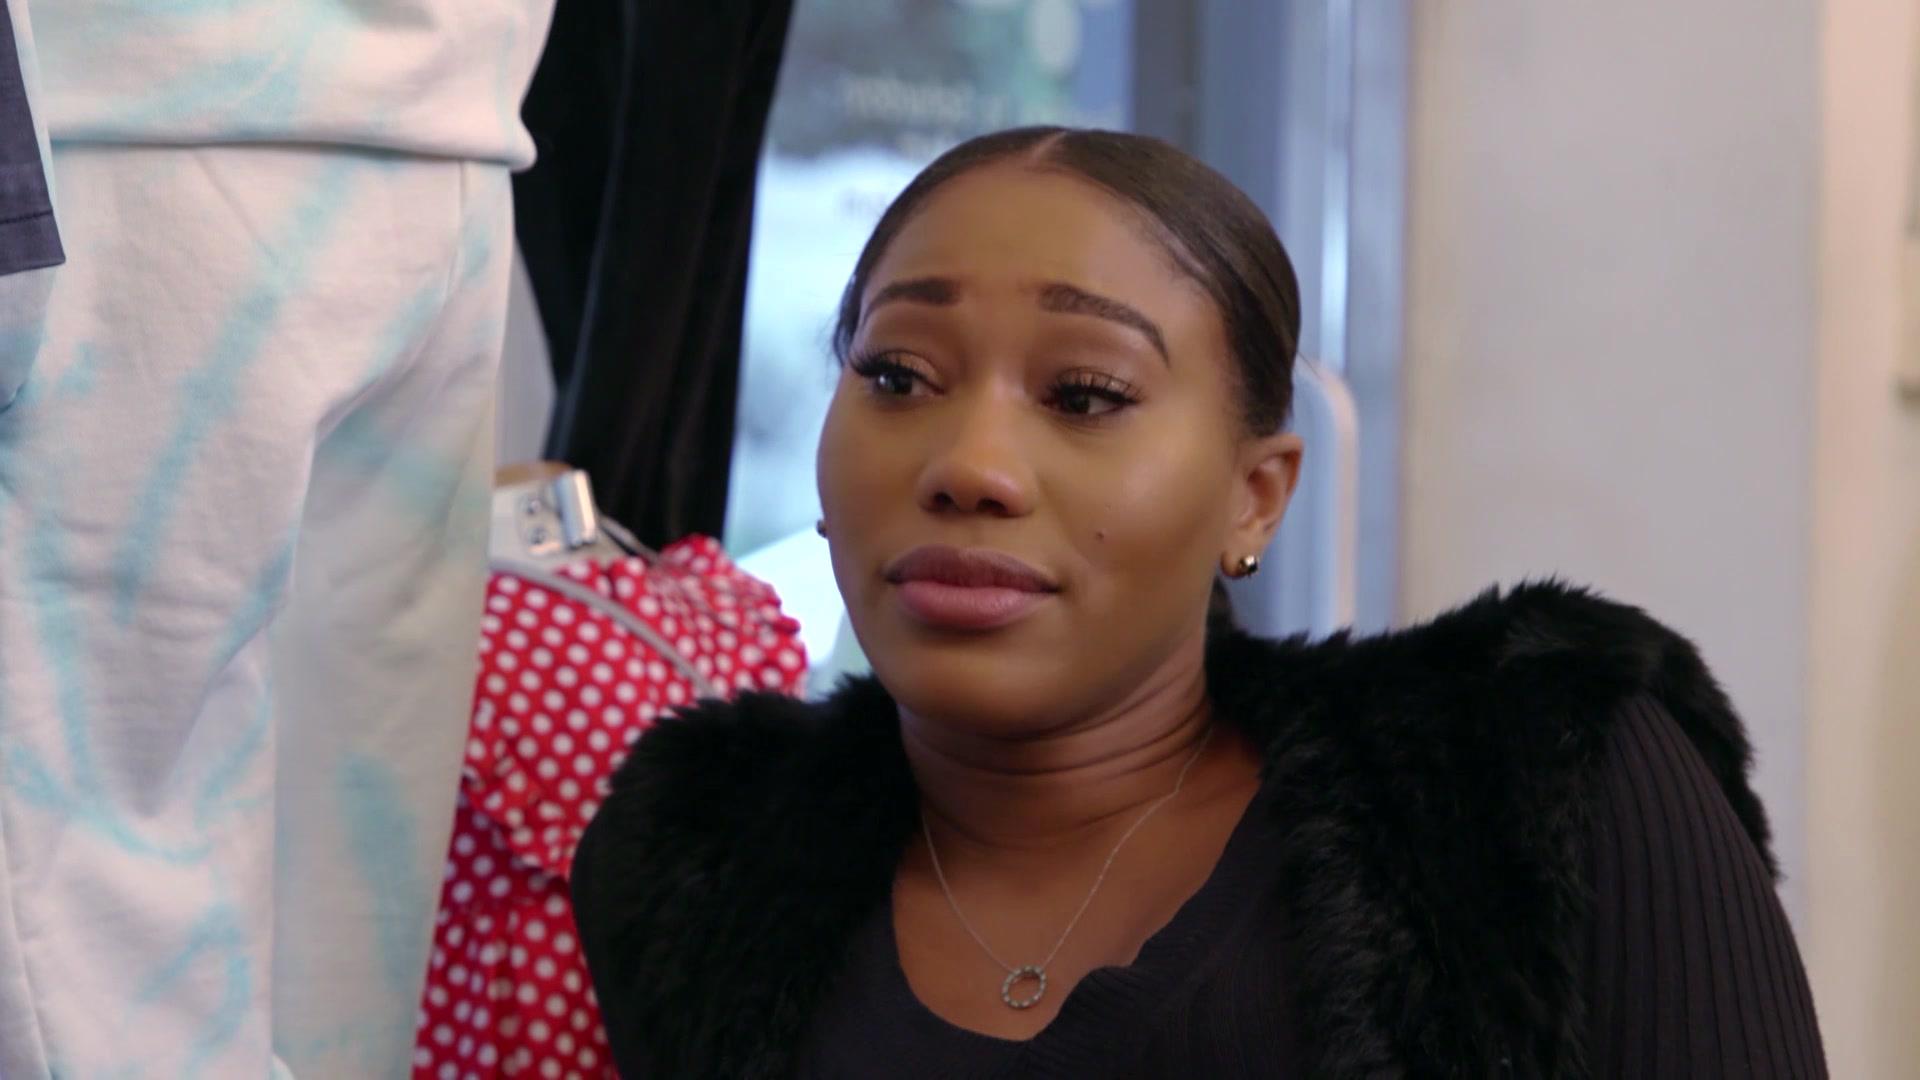 Watch Tee Tee Opens Up To Briana | Growing Up Hip Hop Video Extras